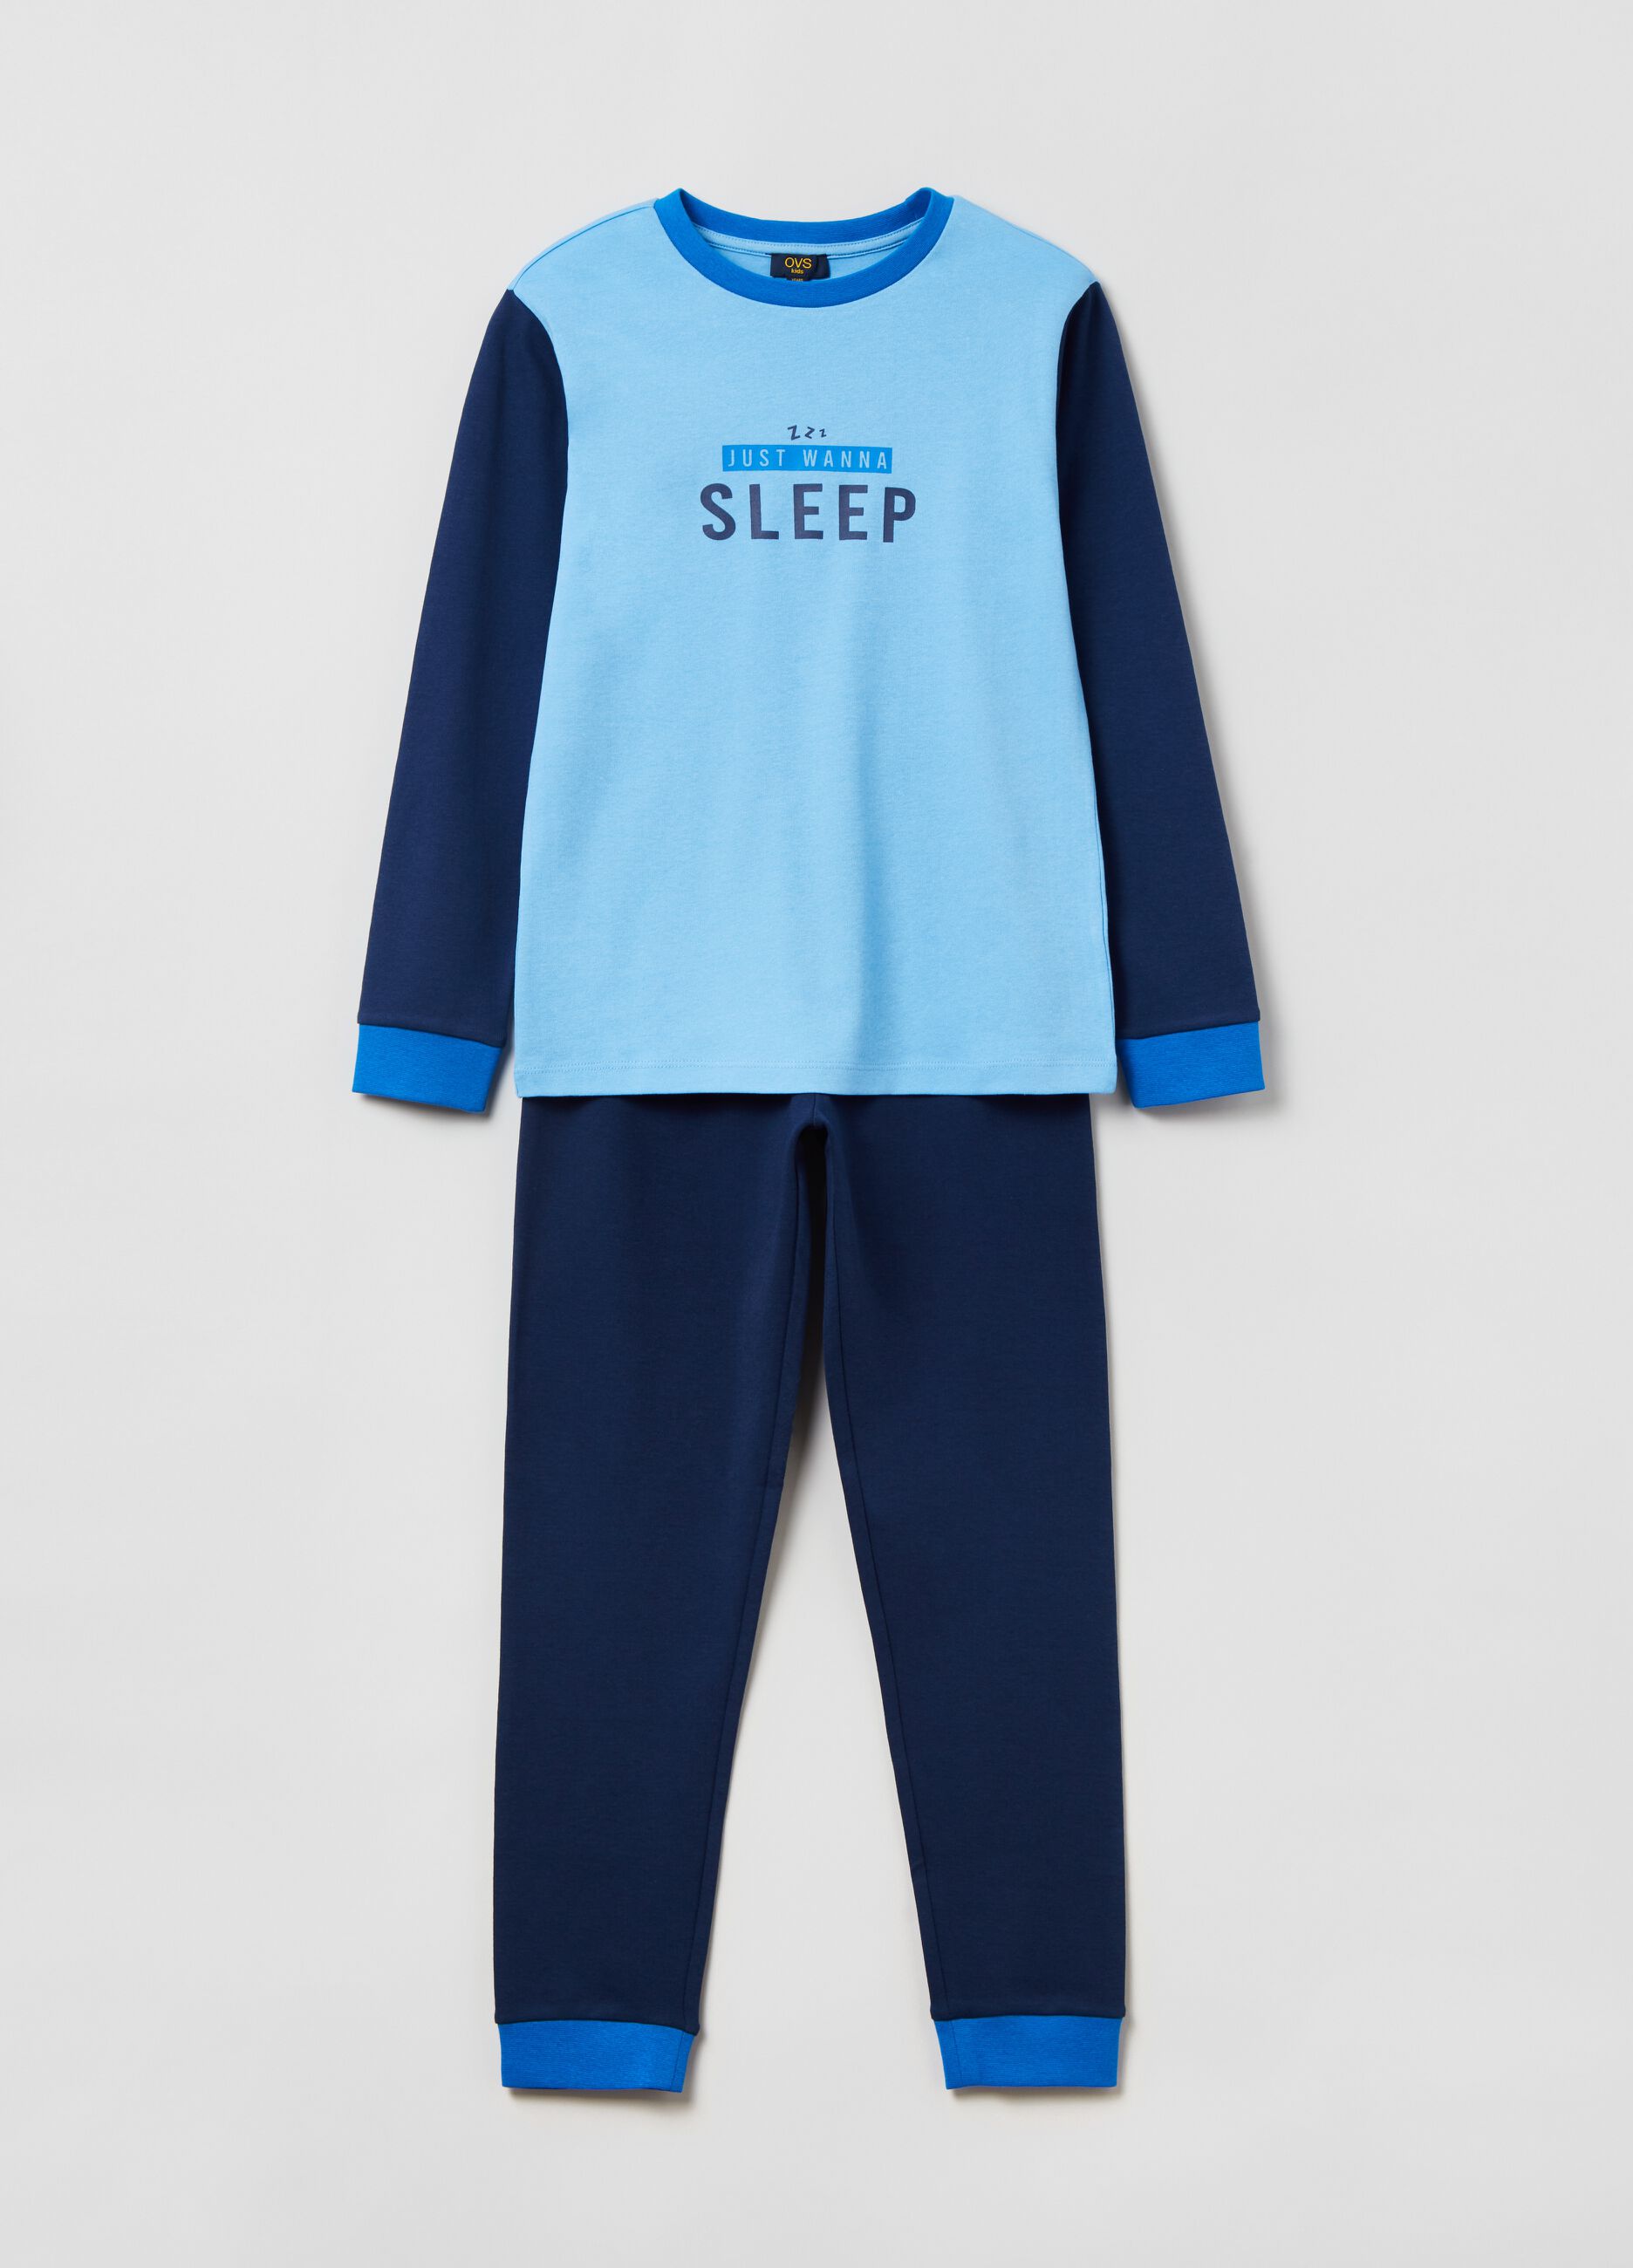 Long cotton pyjamas with lettering print